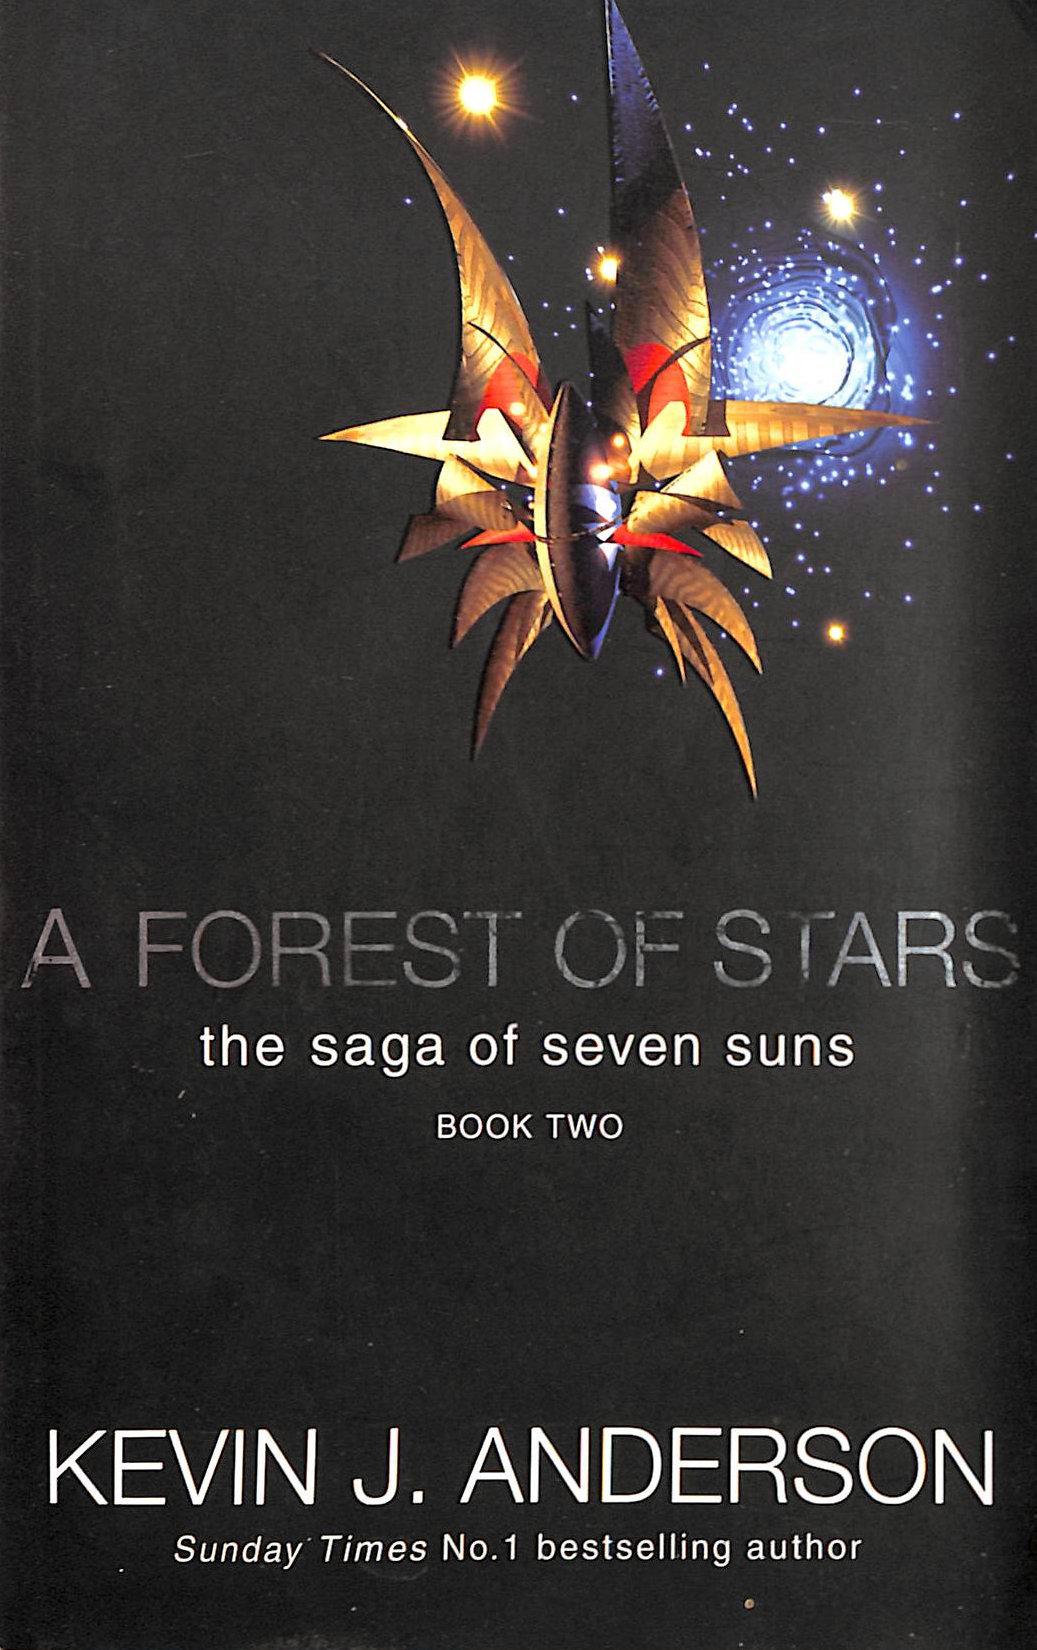 ANDERSON, KEVIN J. - A Forest of Stars: Bk.2 (Saga of Seven Suns)